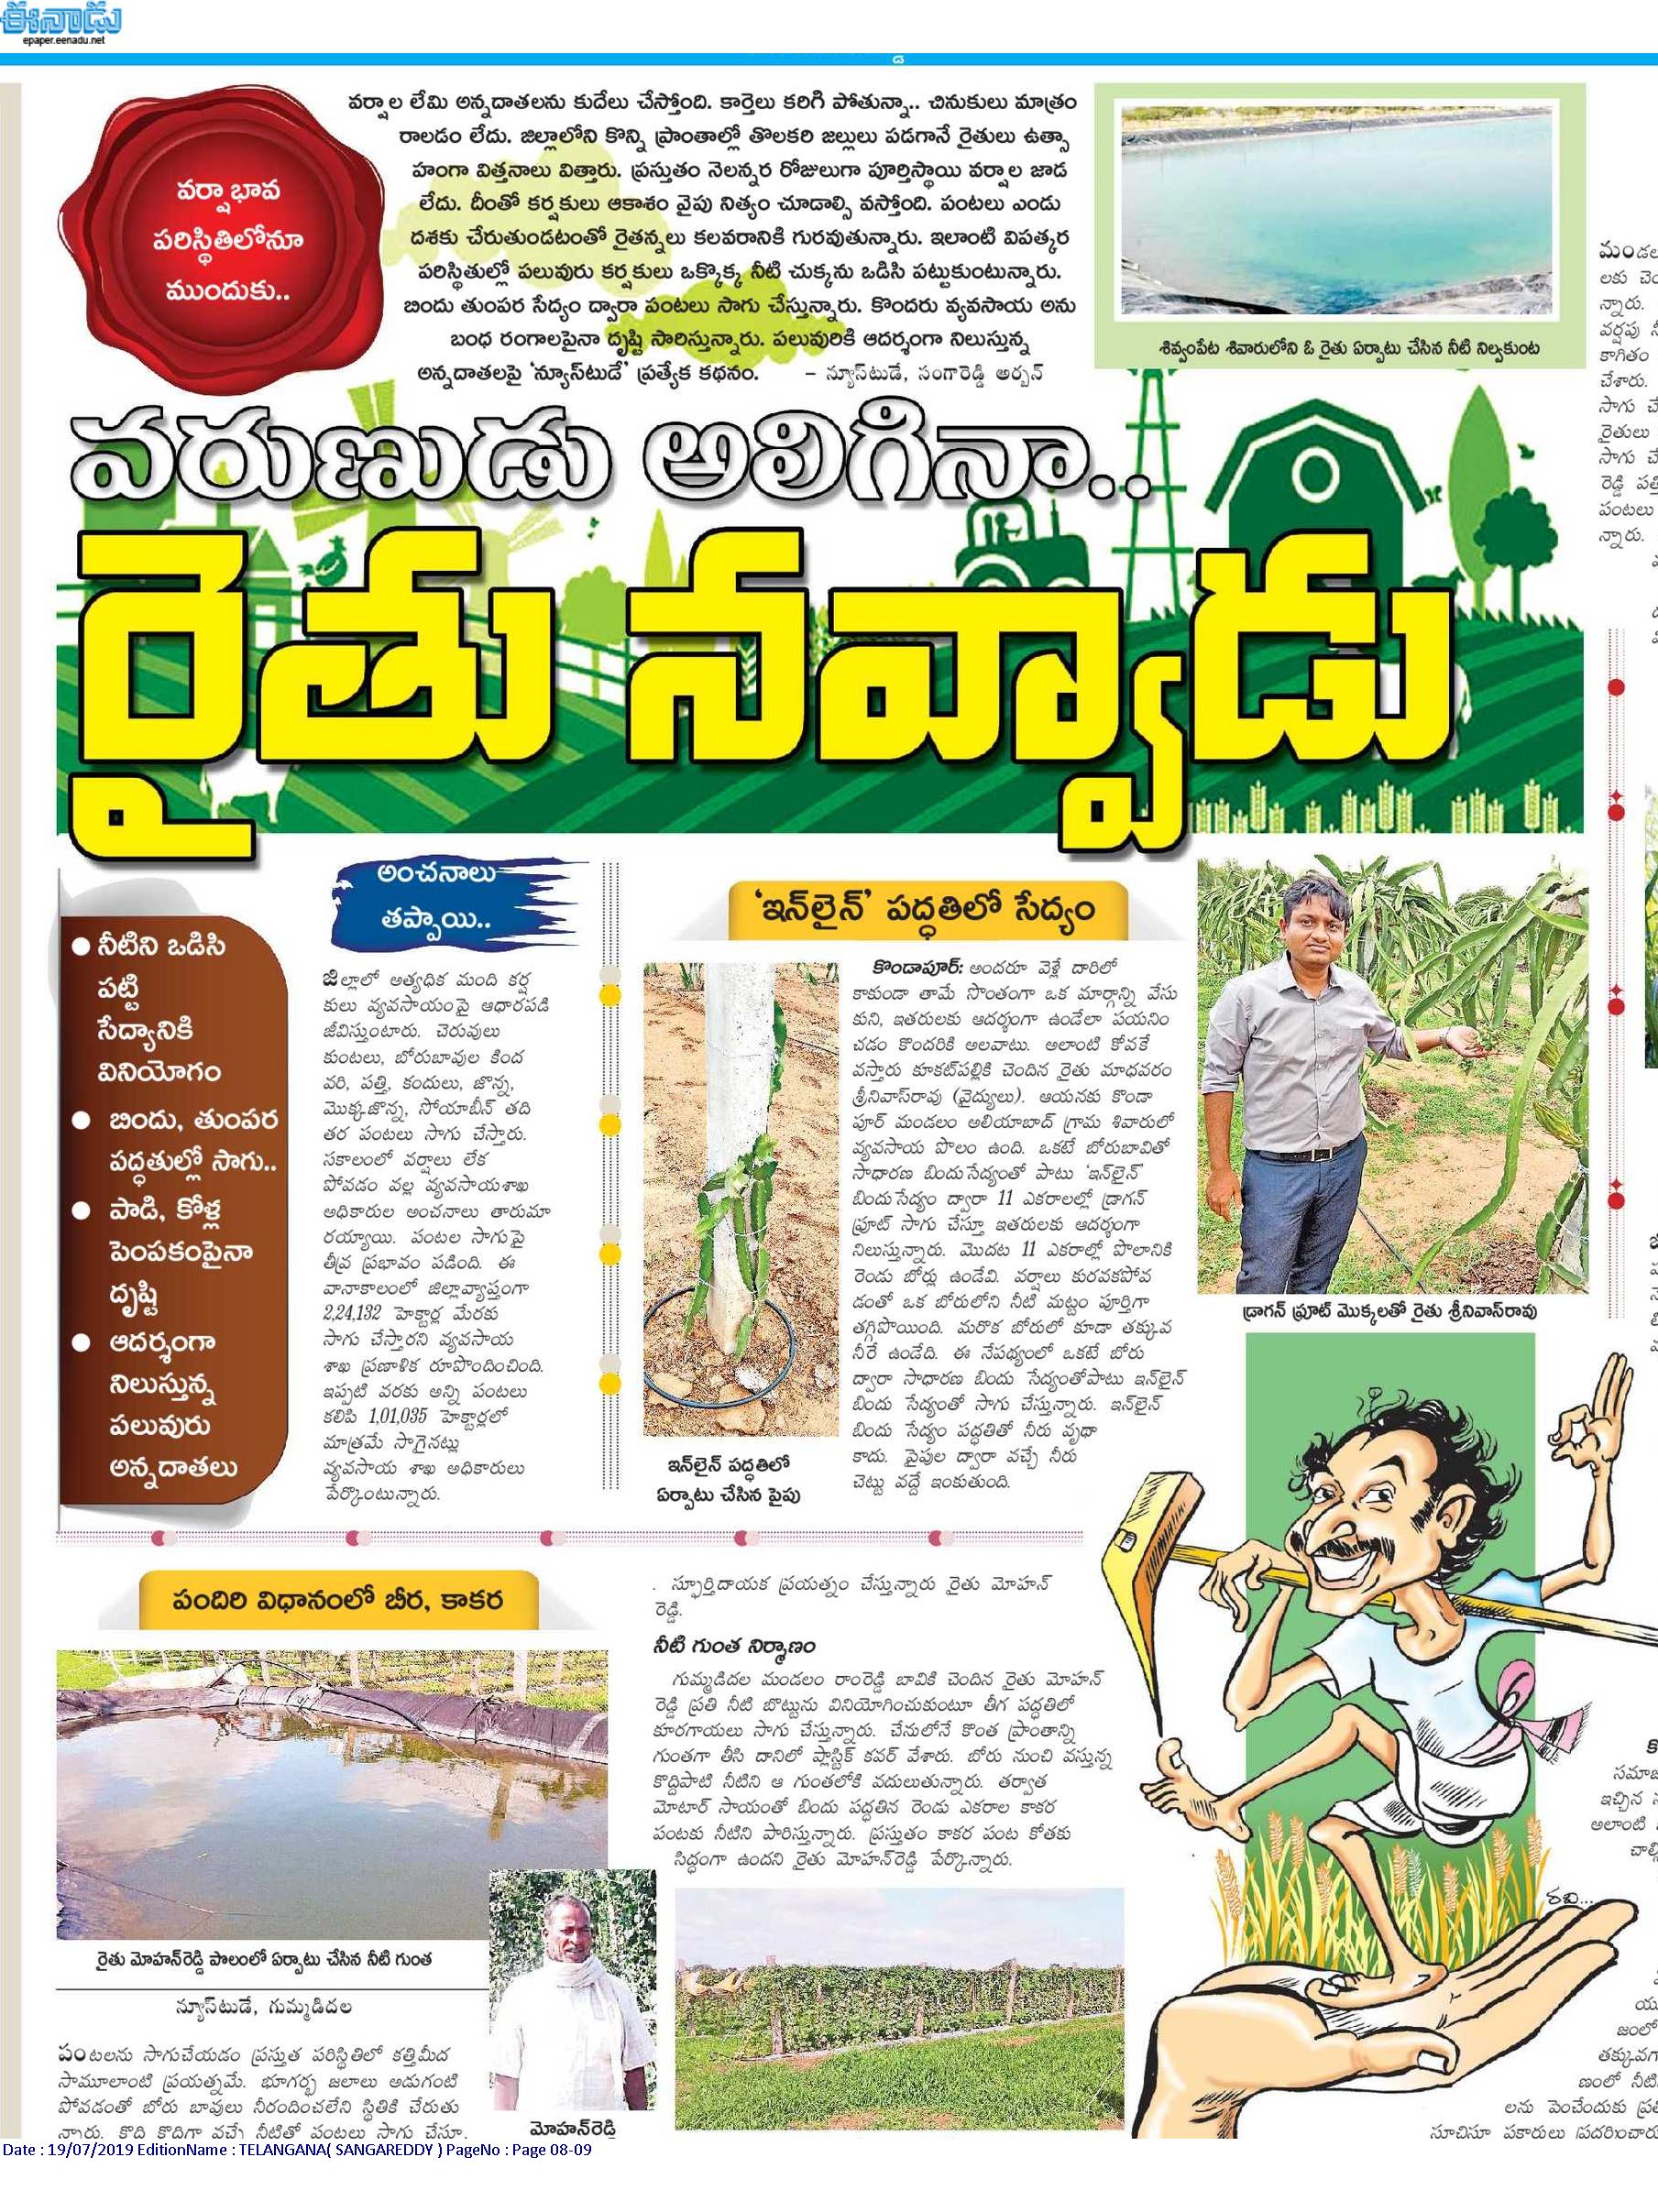 Our largest dragon-fruit farm story printed one of most popular Eenadu newspaper